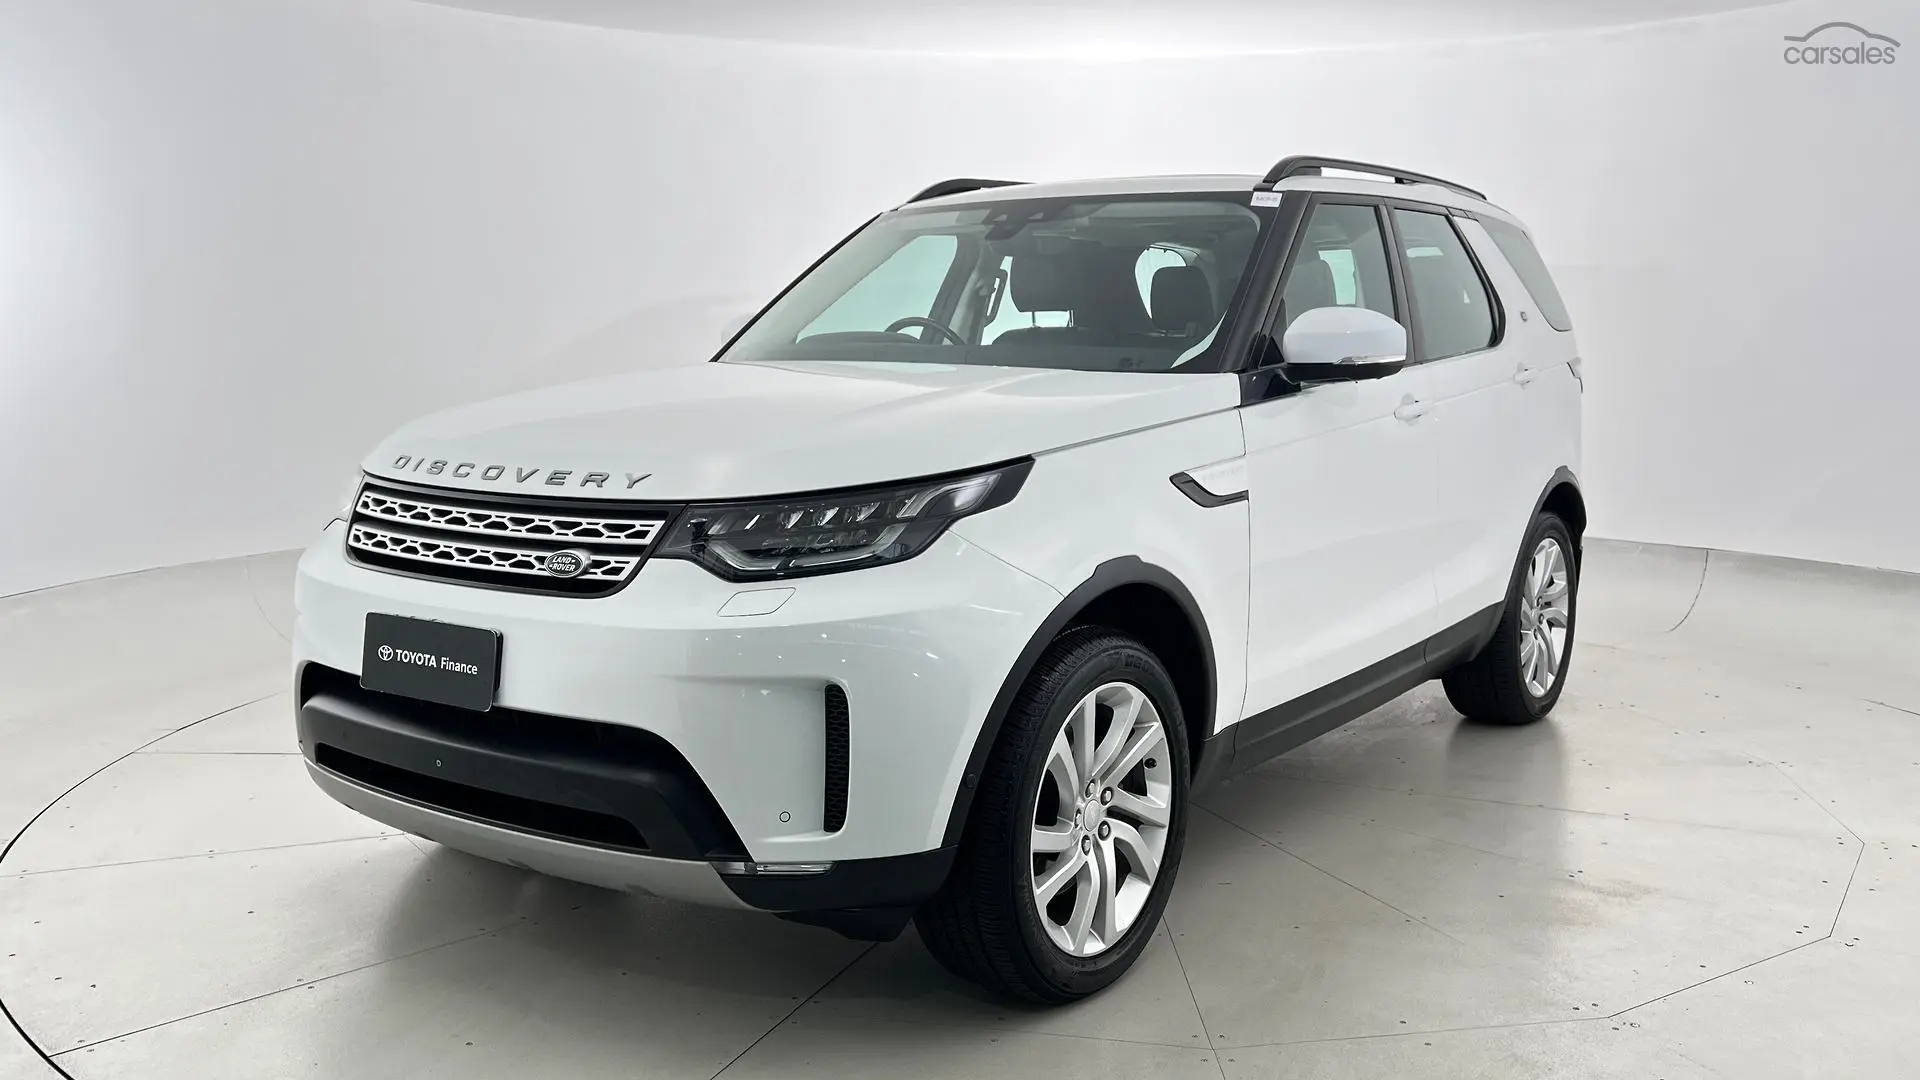 2018 Land Rover Discovery Image 9